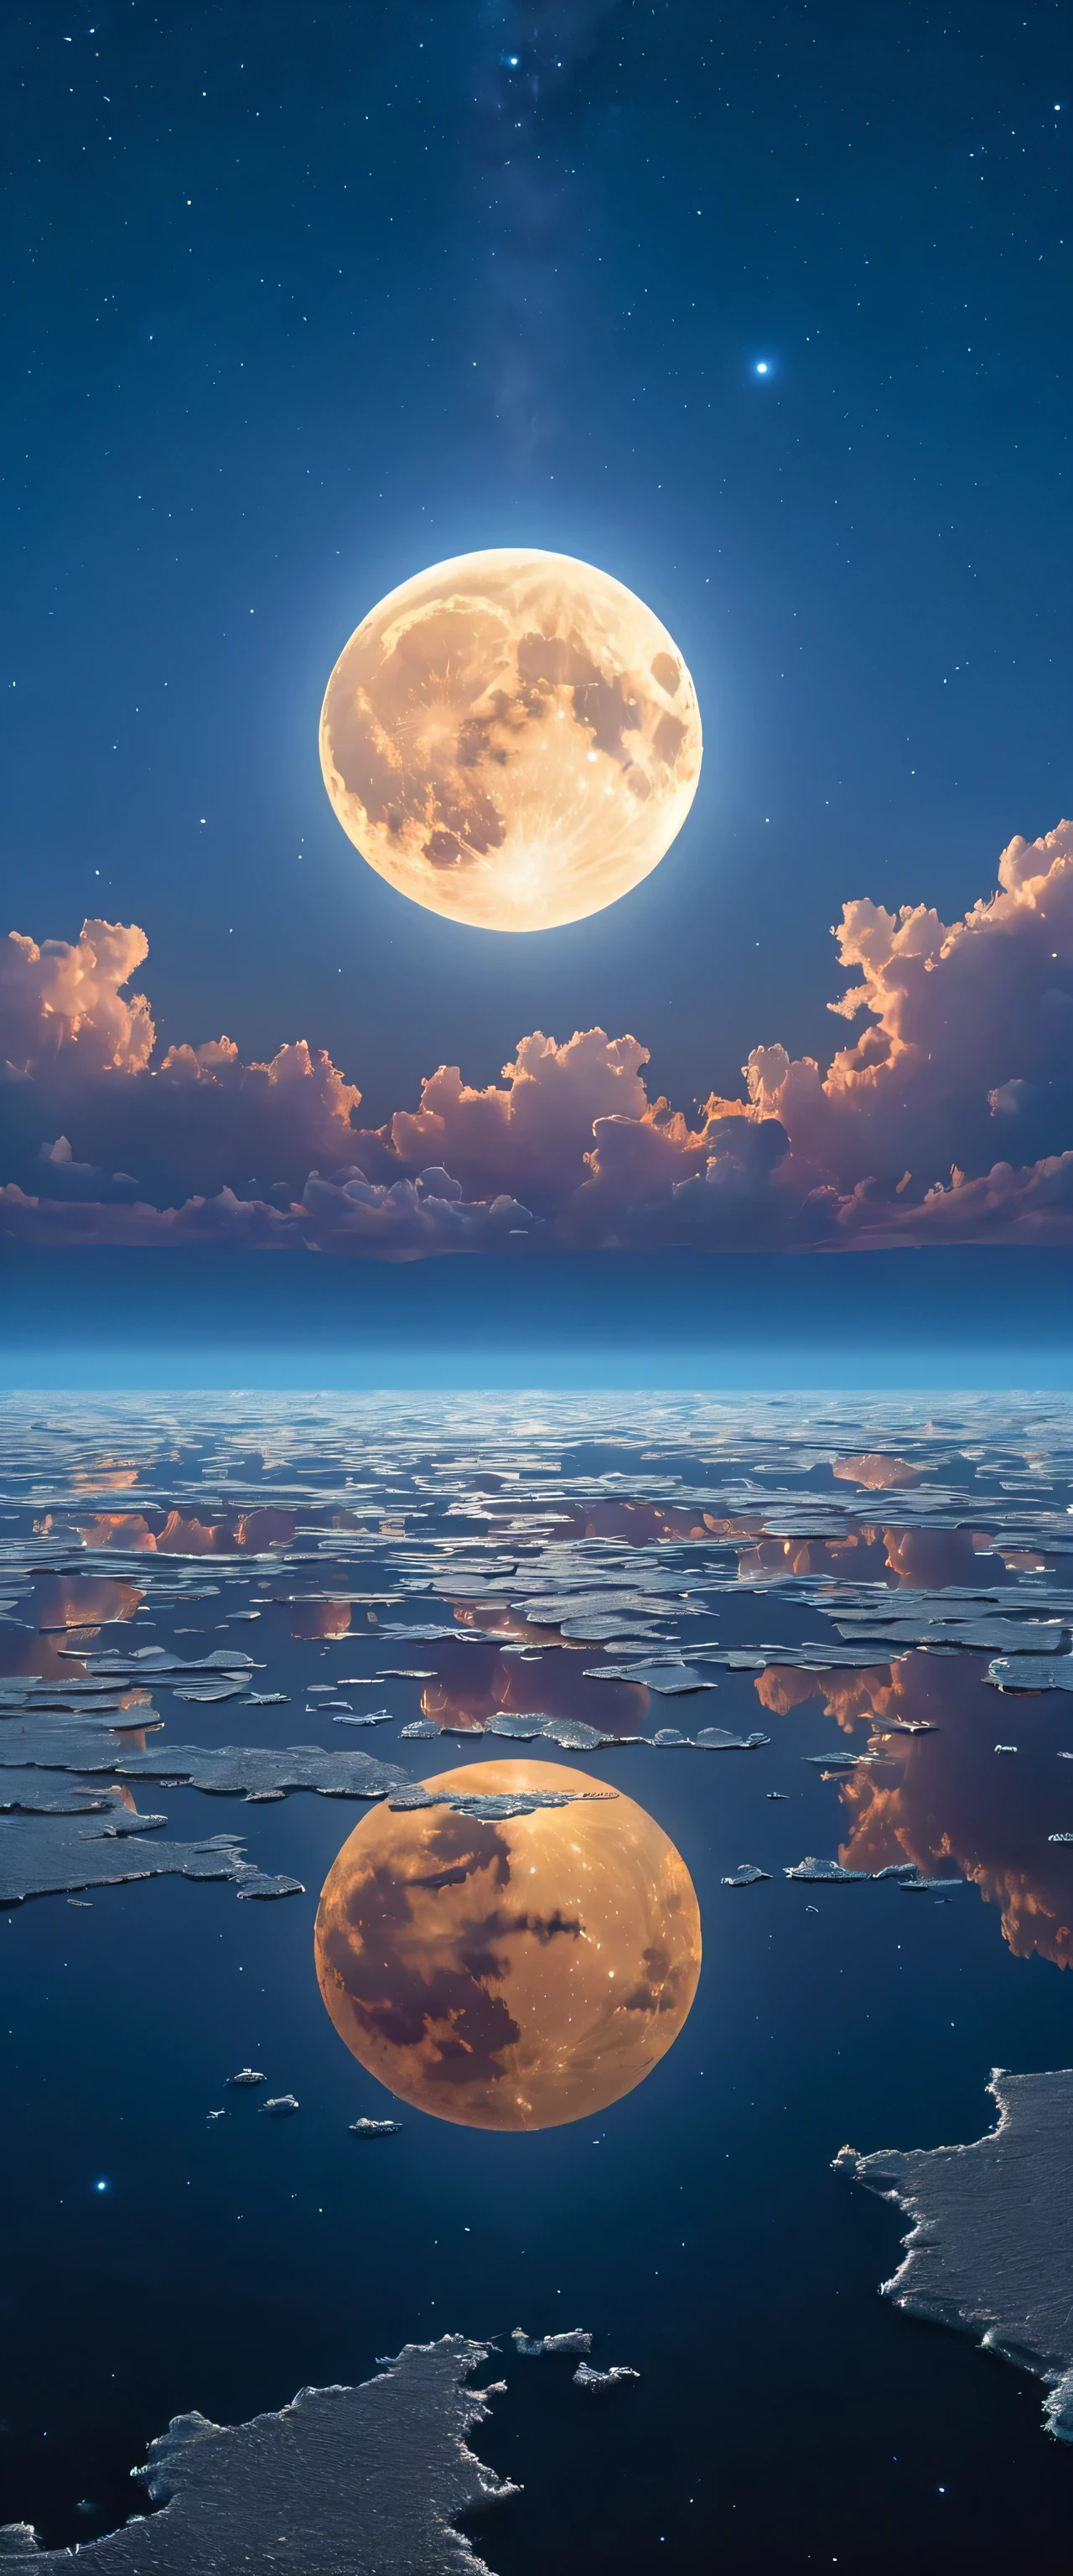 The sky is reflected in the mirrored sea,reflection,symmetry,Uyuni,moonlight,A beautiful sky spreads out,dream-like,,cloud,,Marine blue,wonderful景色が広がります,,Highestの時間をあなたに,Highest品質,photograph,structurally correct,perfect composition,広告用に撮影されたphotograph,beautiful light and shadow,Photographed by a professional photographer,Highestの景色に選ばれた,rich colors,Cast colorful spells,become familiar with,wonderful,wonderful,light effect,Sparkling,reflection,night,night空,star,Highest